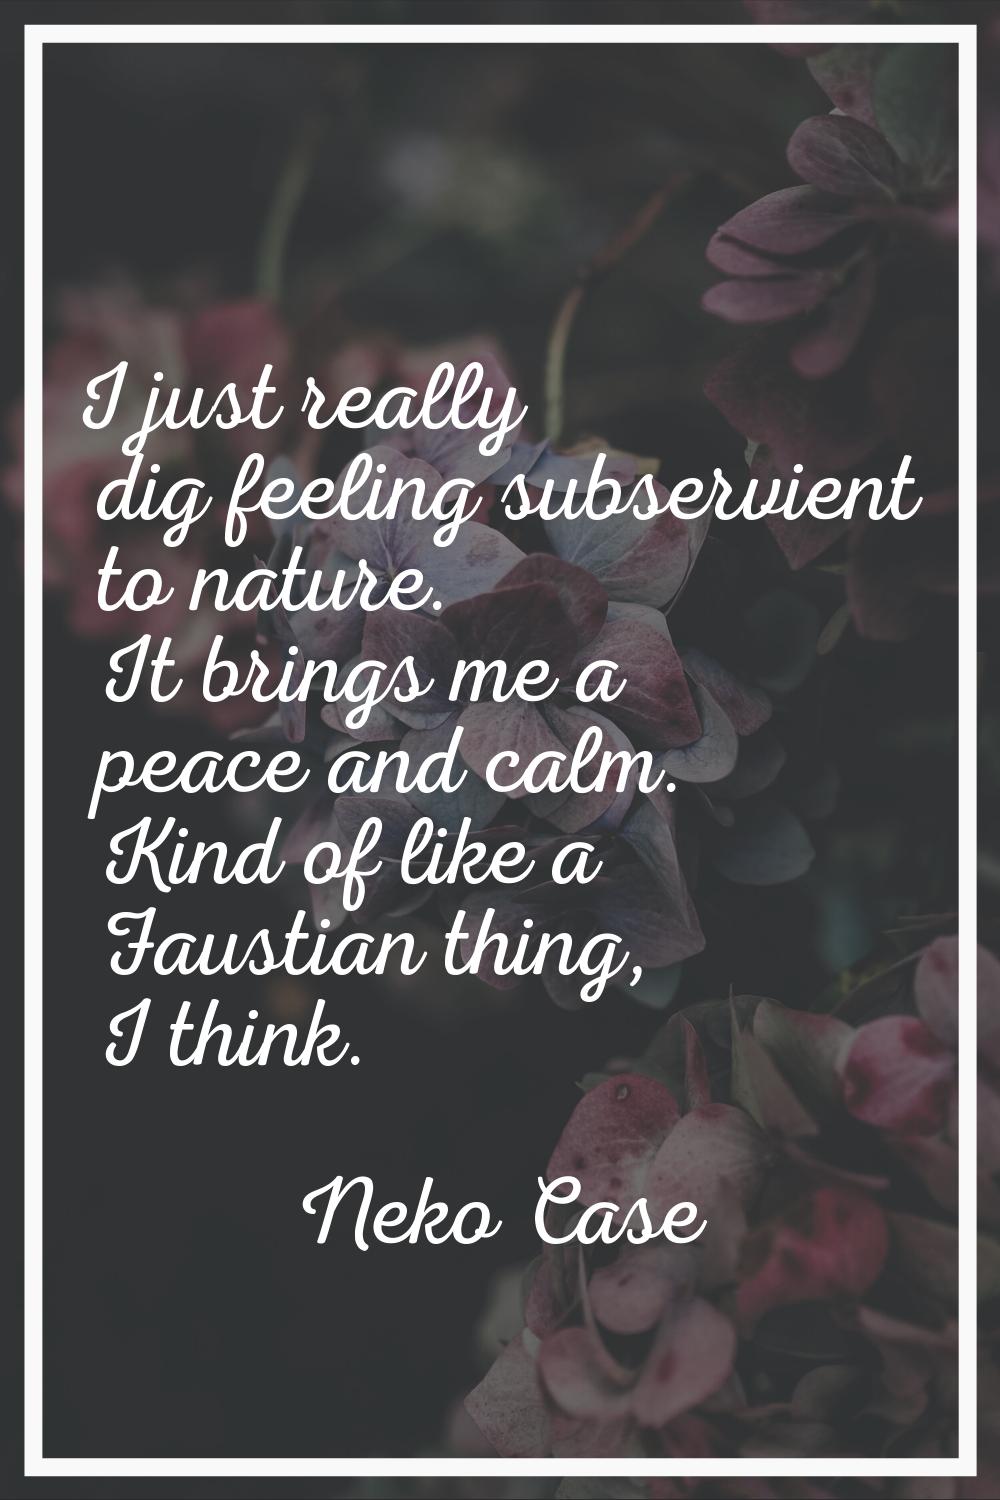 I just really dig feeling subservient to nature. It brings me a peace and calm. Kind of like a Faus